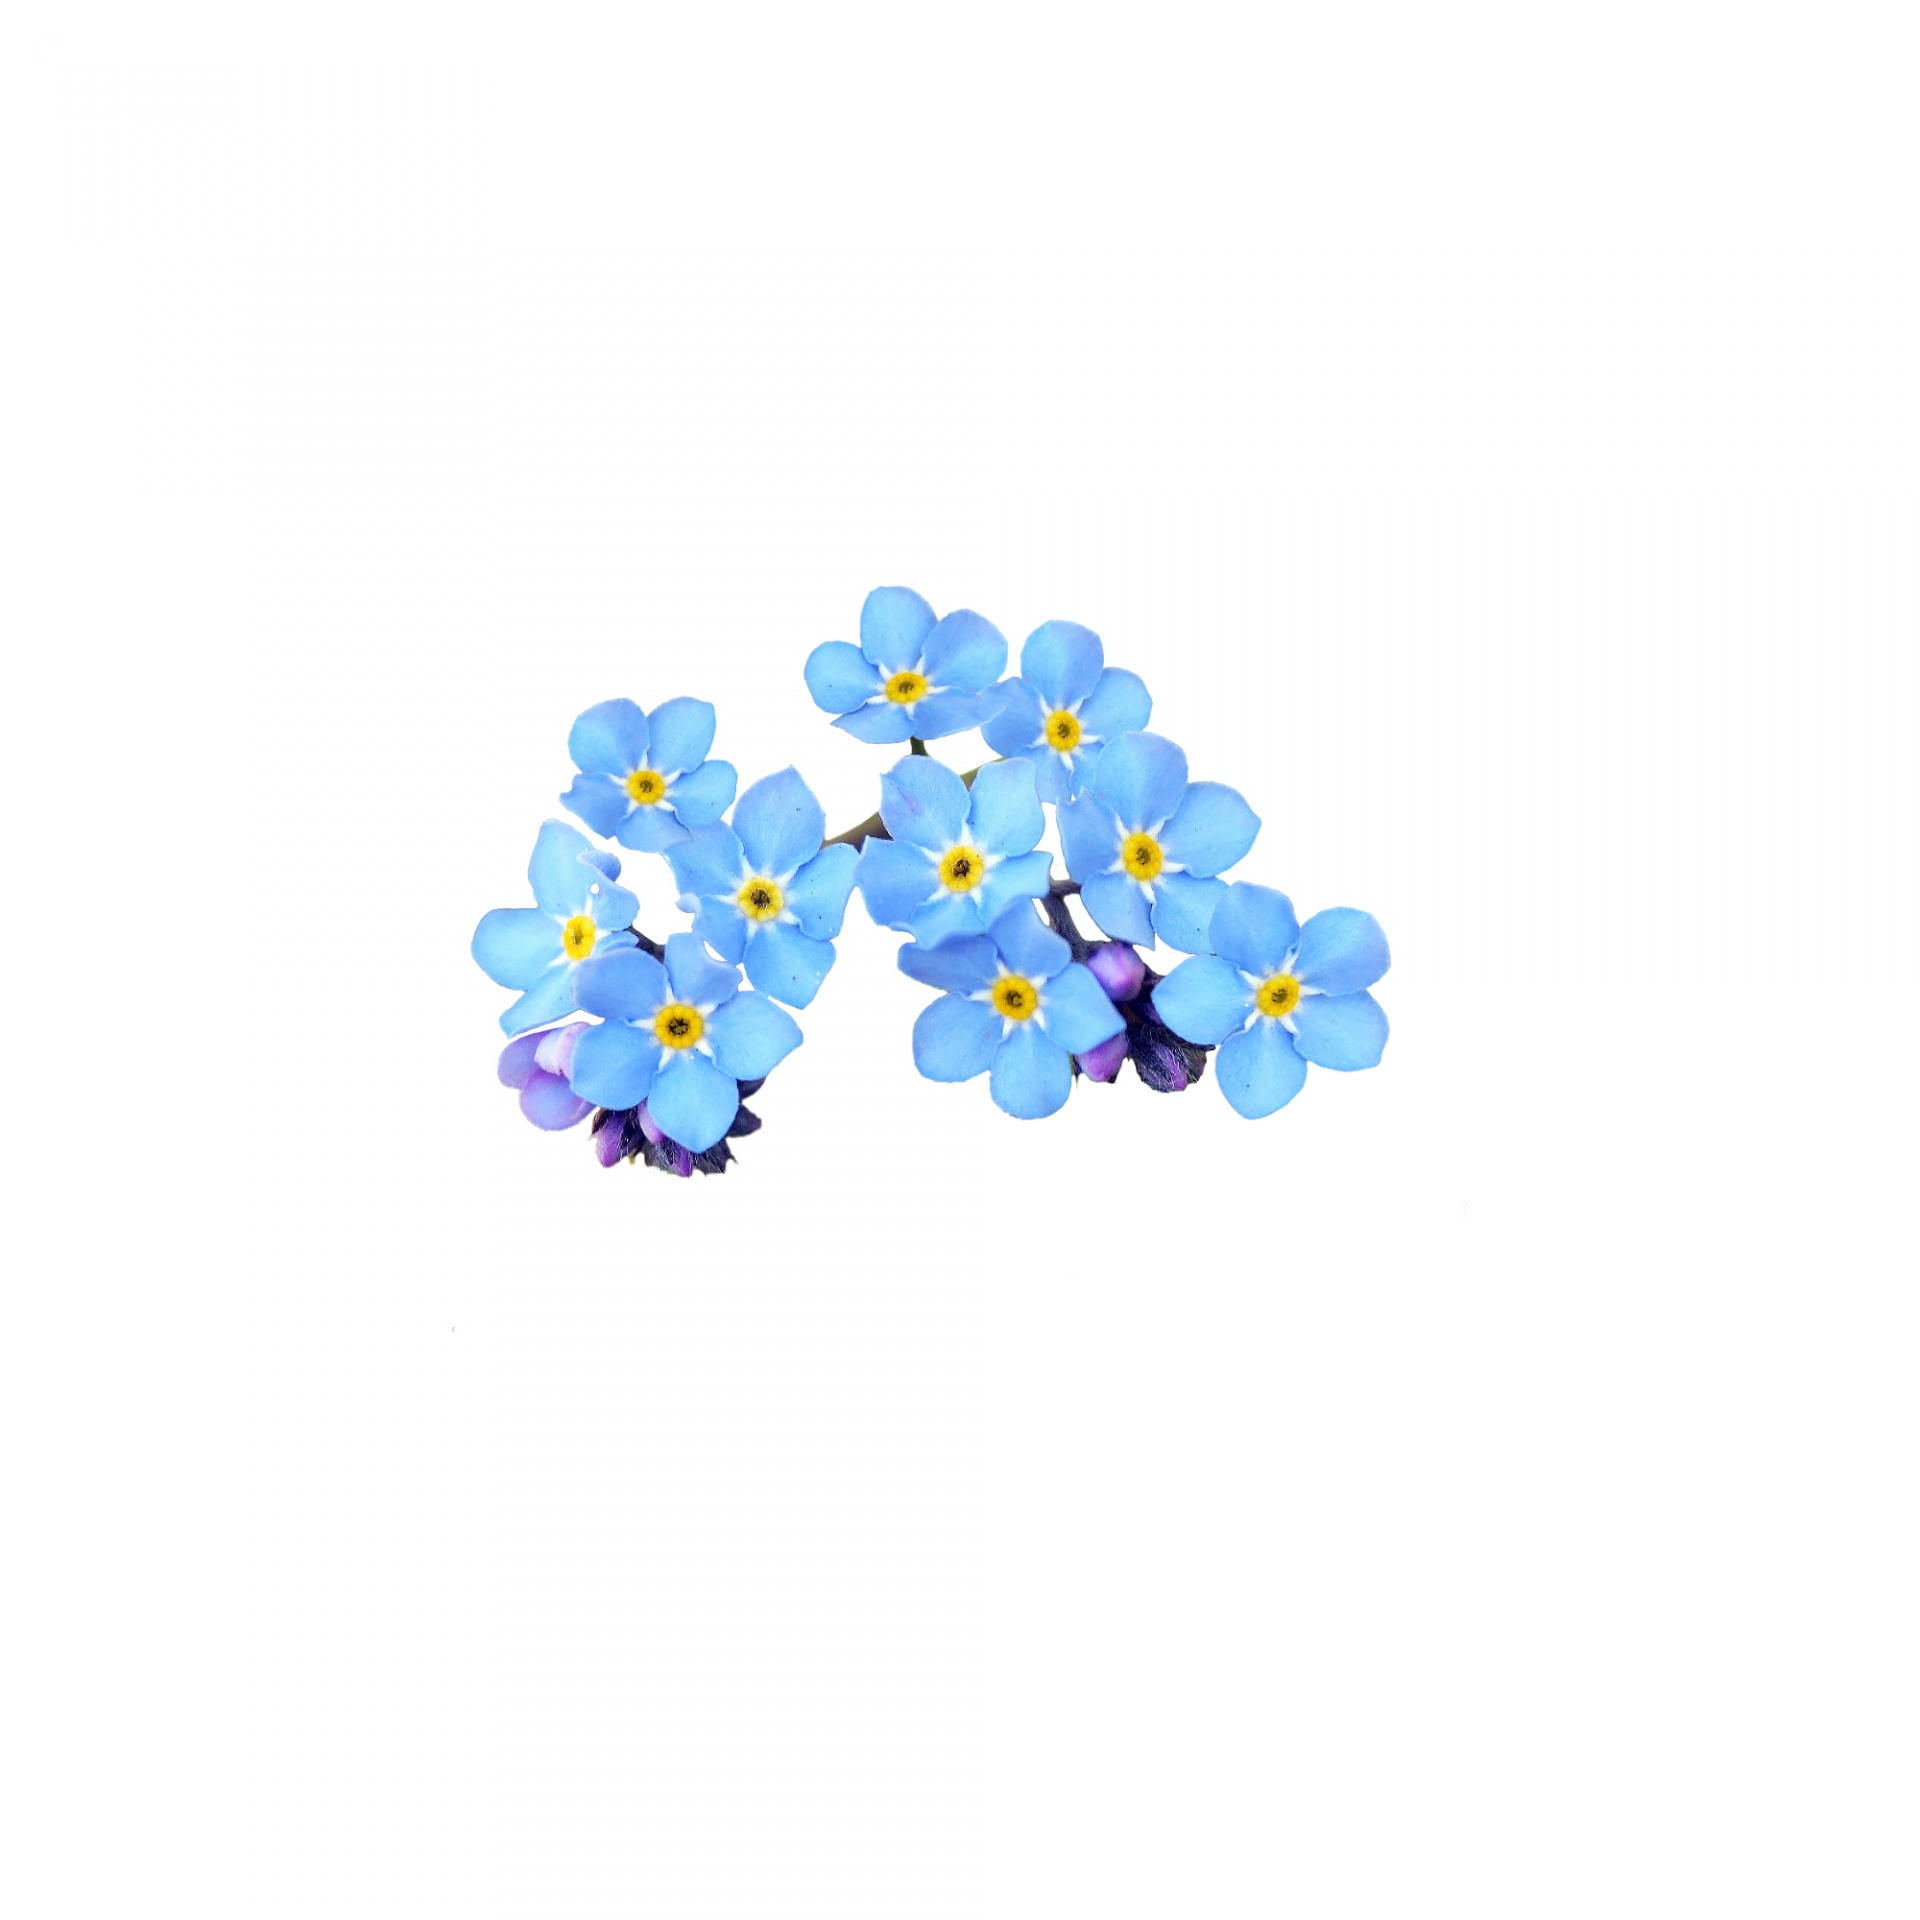 forget-me-not flower isolated free photo